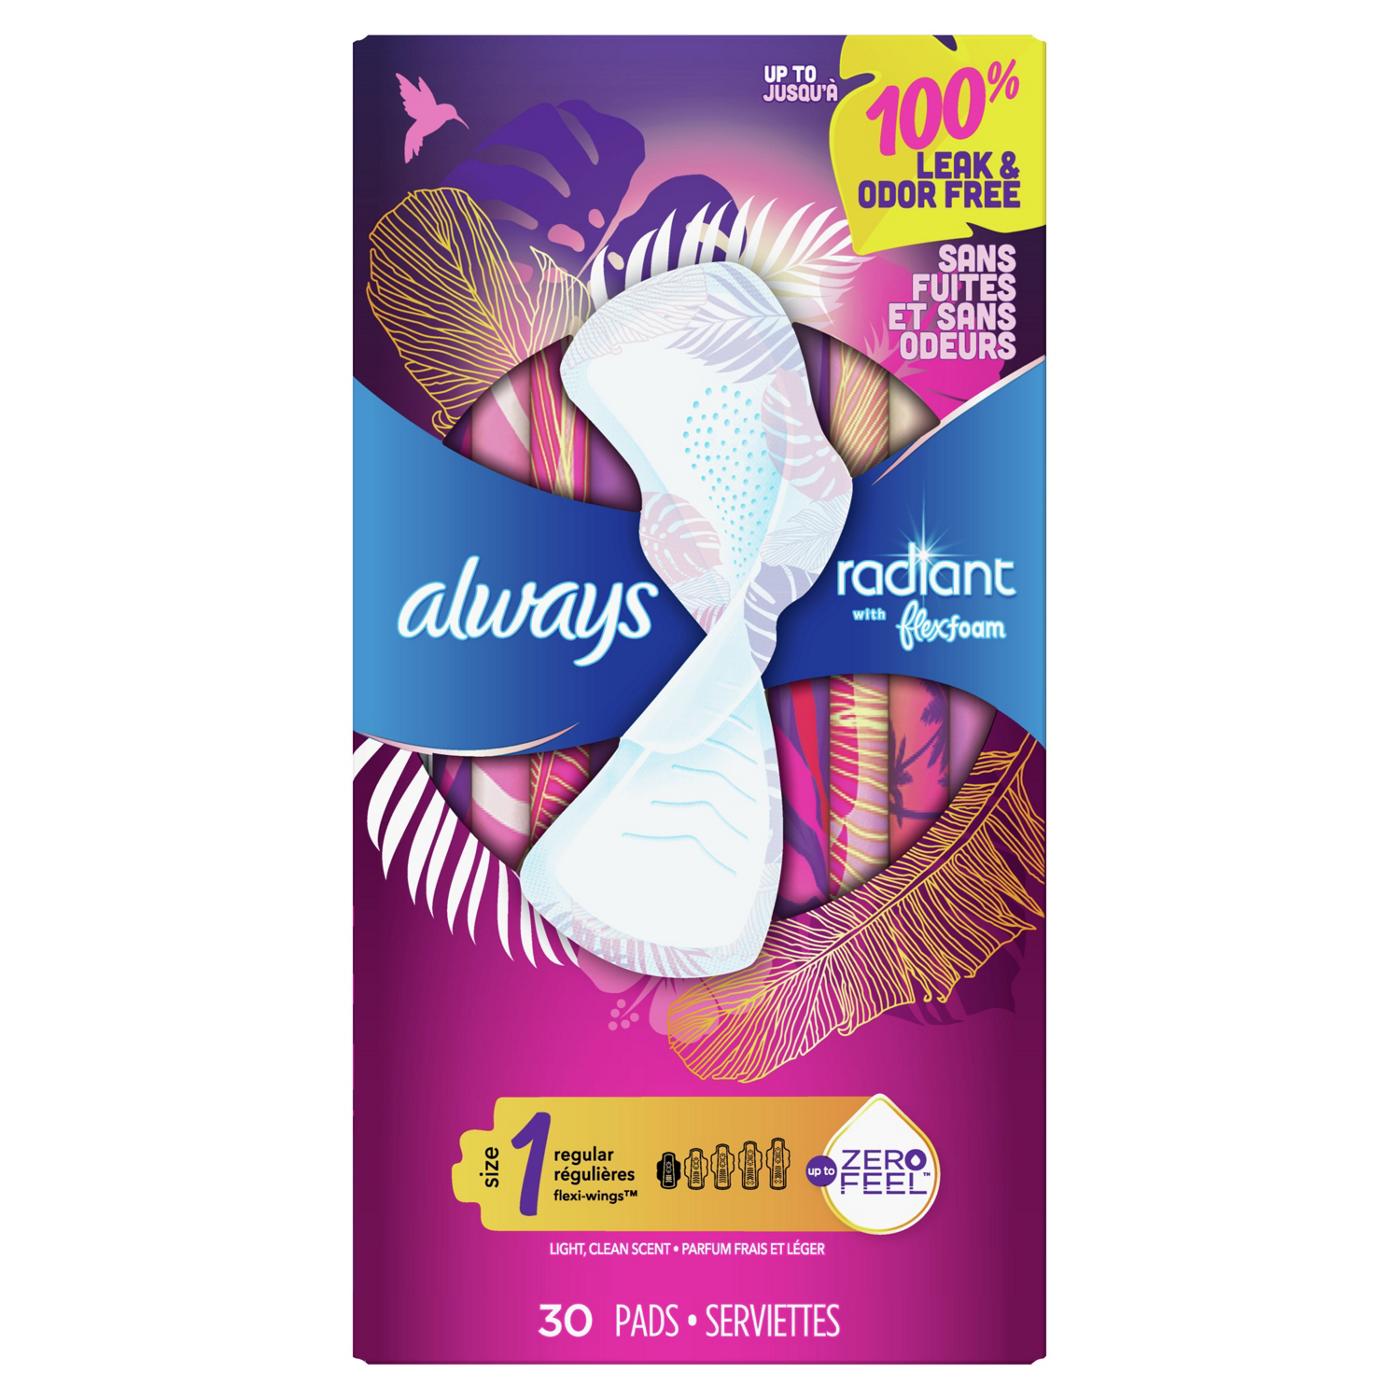 Infinity Flex Foam with Wings, Size 1, Regular Flow, Unscented, 18